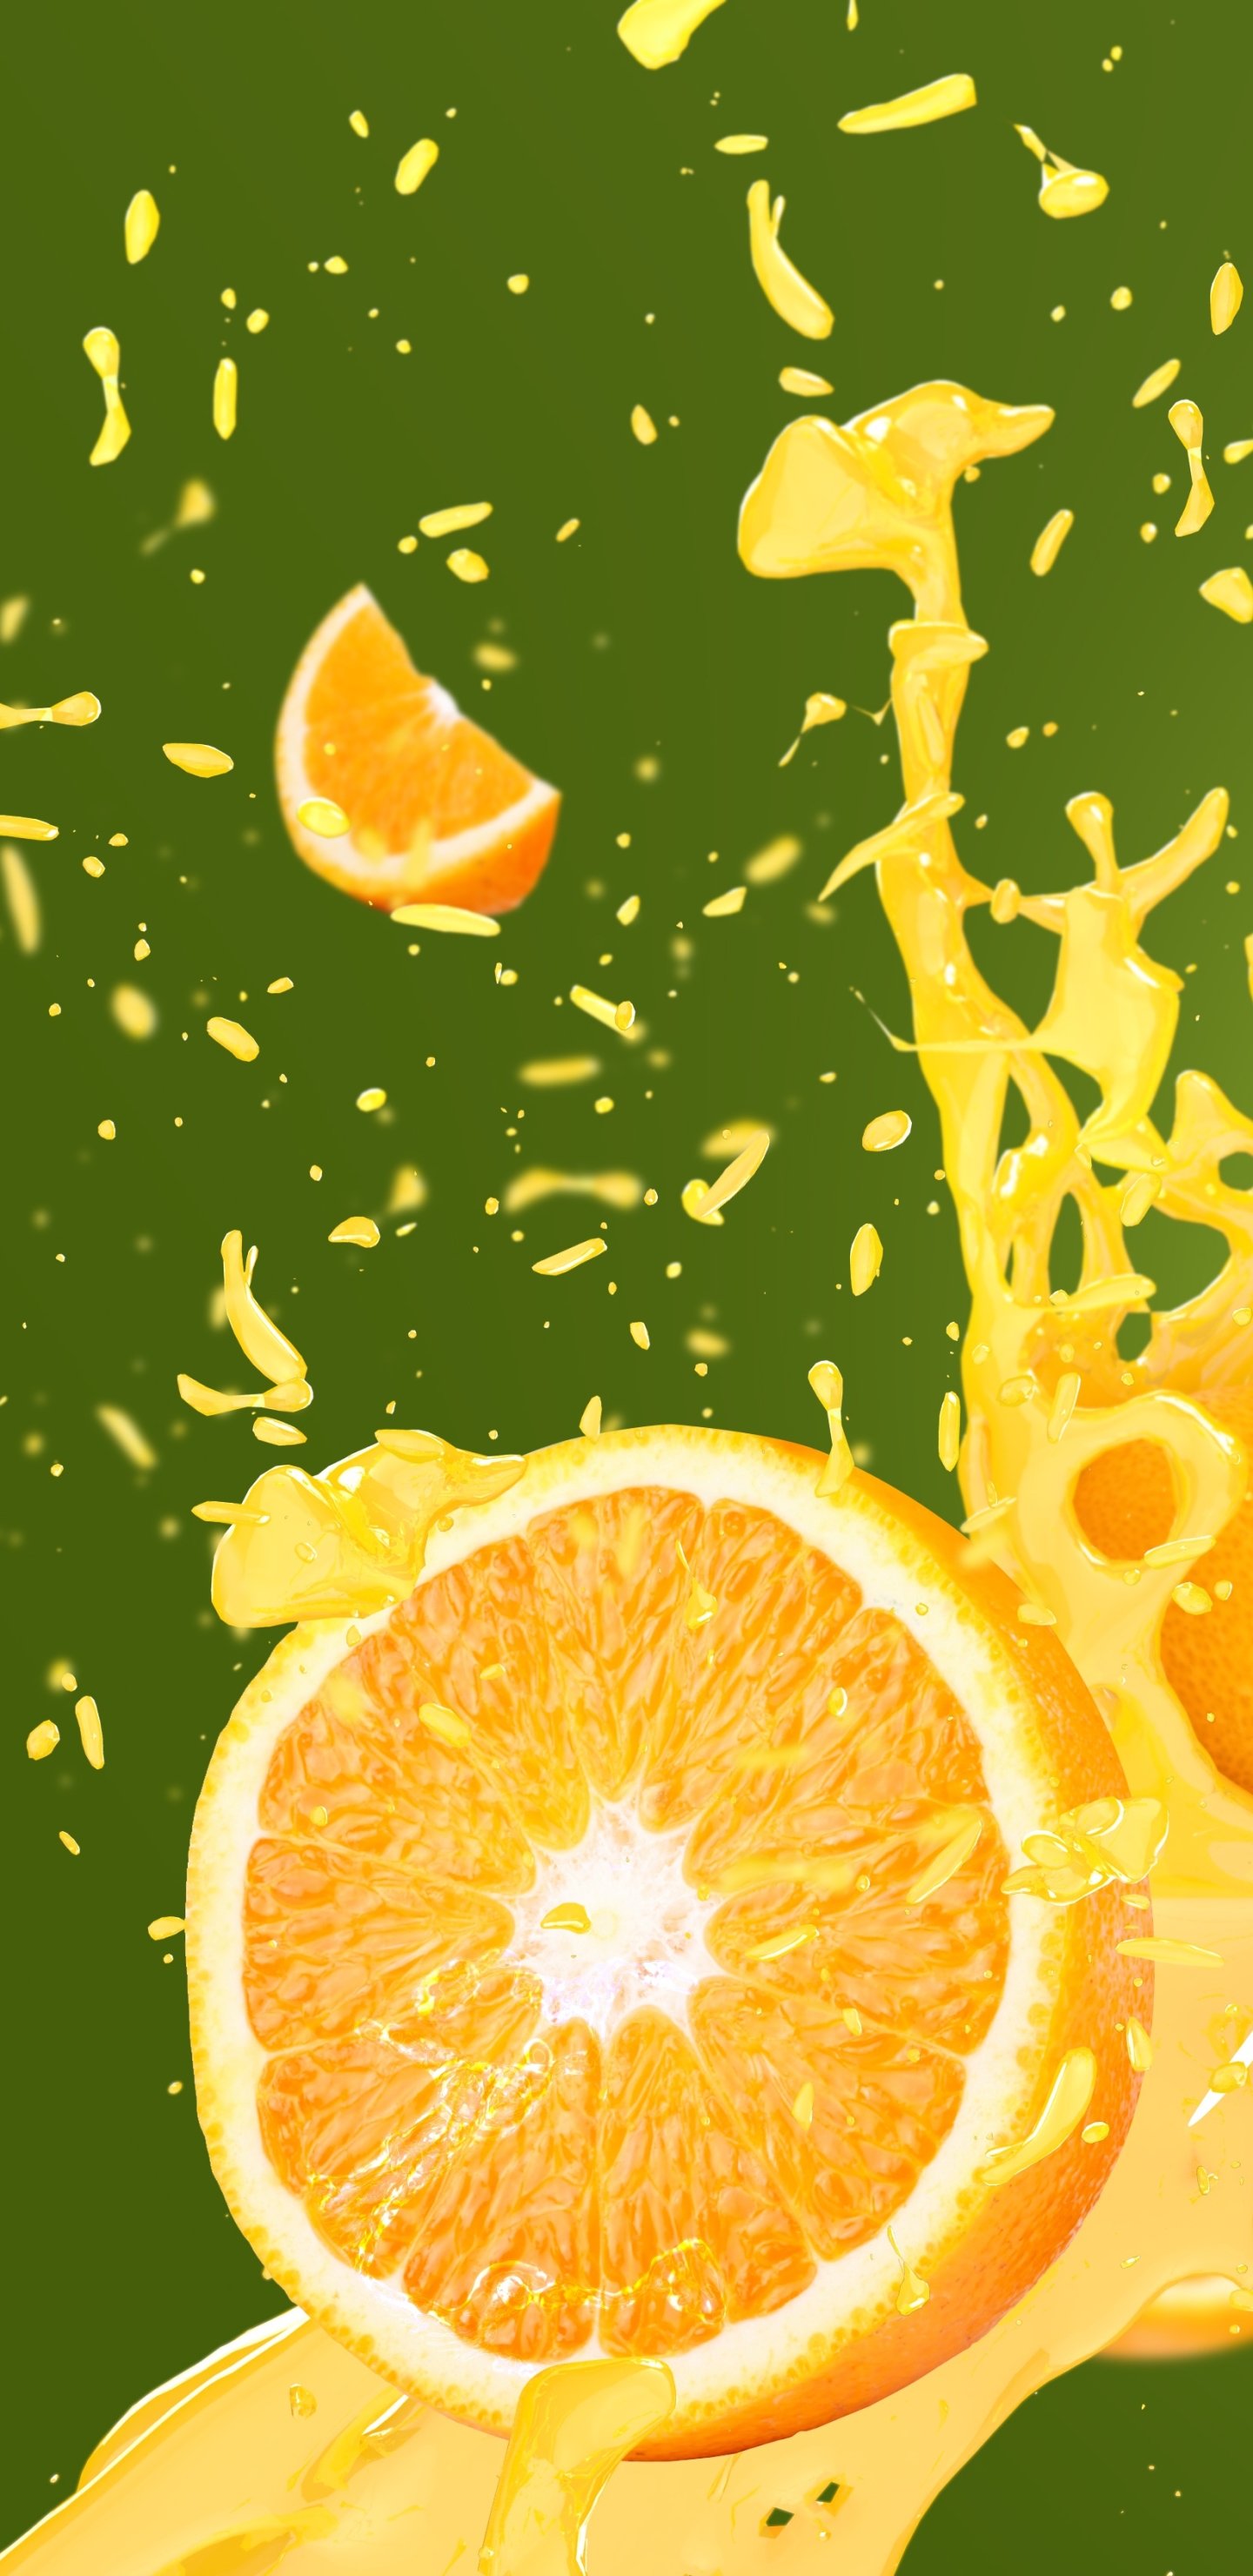 1145654 free download Orange wallpapers for phone,  Orange images and screensavers for mobile